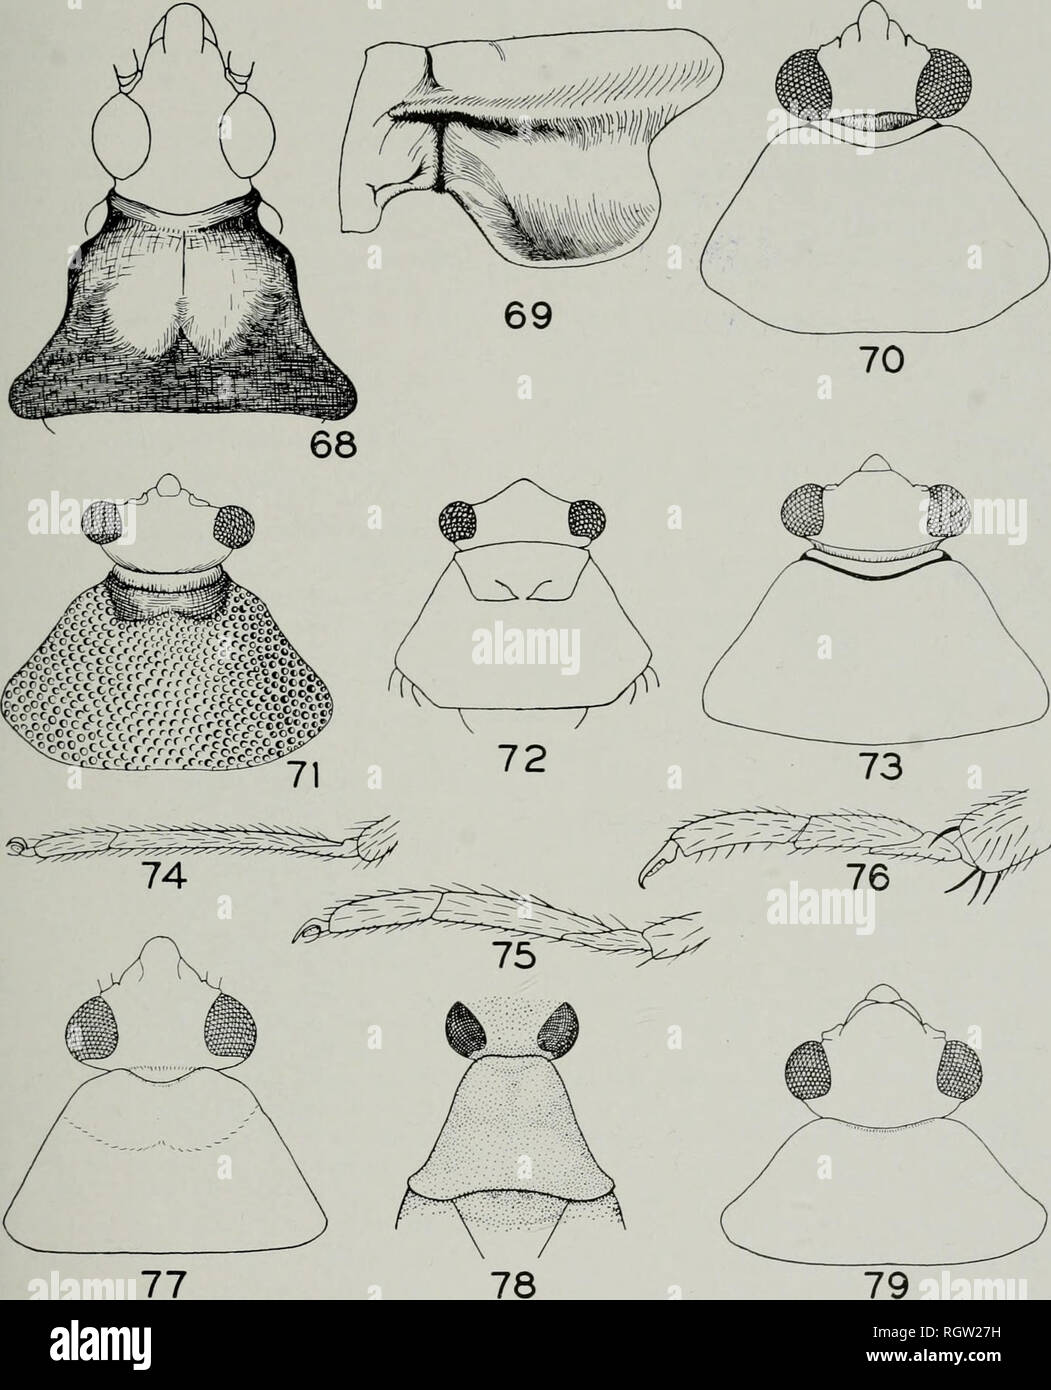 . Bulletin. Natural history; Natural history. September, 1941 Knight: Plant Bugs, or Miridae, of Illinois 23. Fig. 68.âHead and pronotum of Fulvius Fig. 73.âHead and pronotum of Monaloc- bmnneus. oris filicis. T?;â An o^u c nf- â J 1 L , I.. Fie. 74.âTarsi of Macrolophus tenuicornis. rig. 09.â frothorax or Mtrts dolabratus, lat- â &quot;&amp;â¢'â¢ / eral aspect, showing the prominent lateral ridge Ys,. 75.âTarsi of Dicyphus vestitia. characteristic of the Mirinae. Fig. 76.âTarsi of Orectoderus obliquus. Fig. 70.â Head and pronotum of Derae- ^. ..Â» tt , , r r.; â oco7-is nubilus. '^S- ''â¢âHe Stock Photo